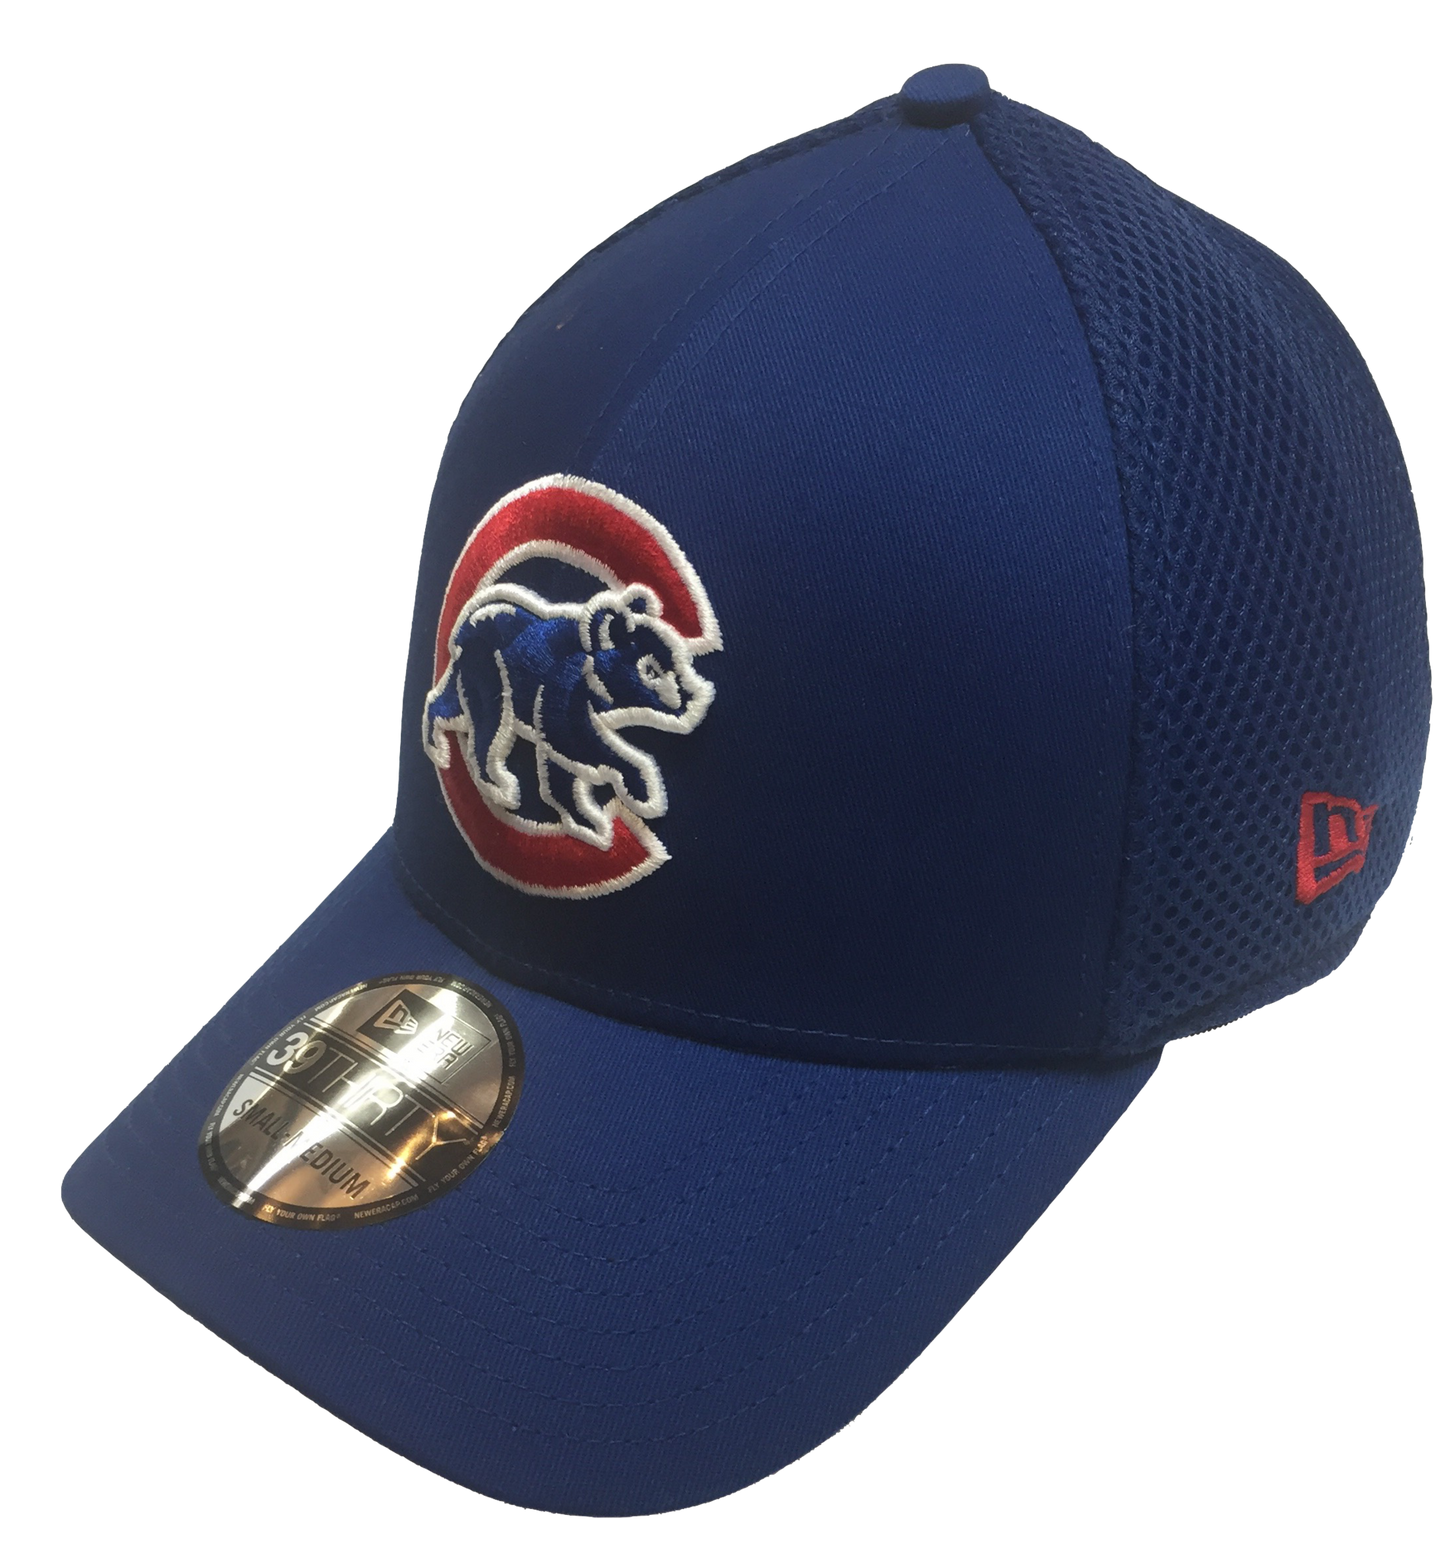 Chicago Cubs Mega Team Neo 39THIRTY Flex Fit Cap By New Era - Pro Jersey Sports - 1